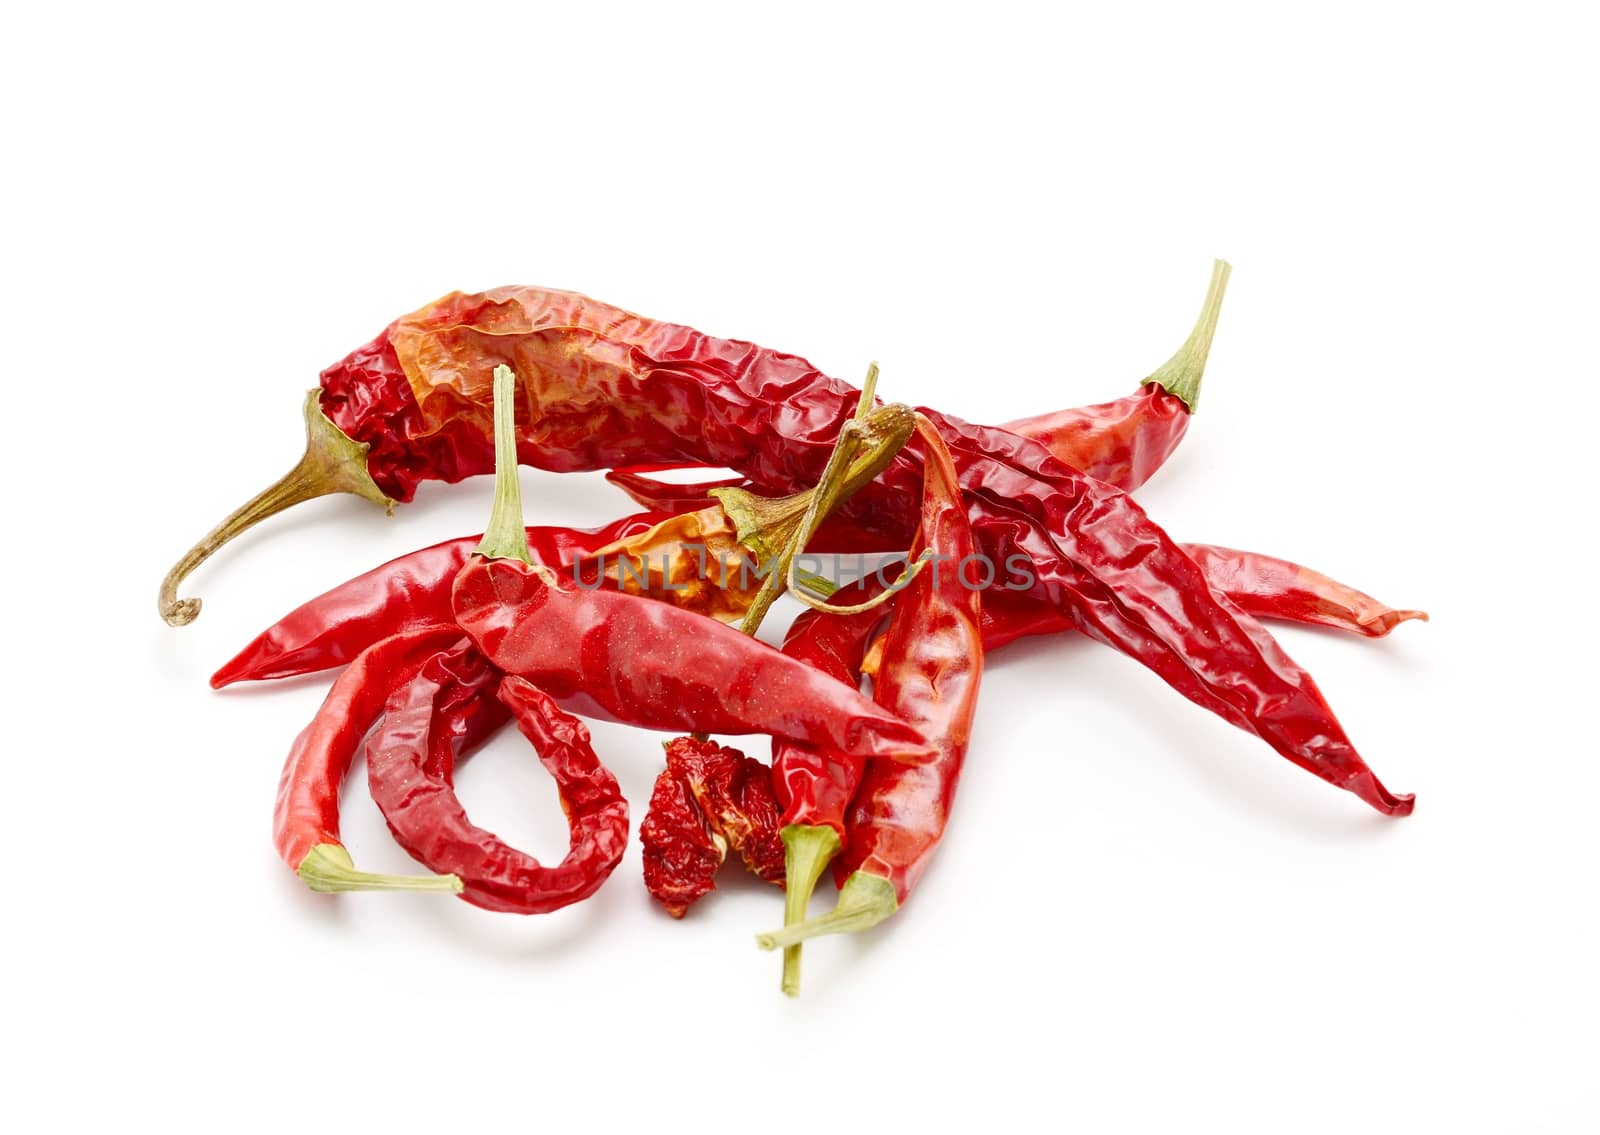 Heap of dried red hot chilli peppers on white background.